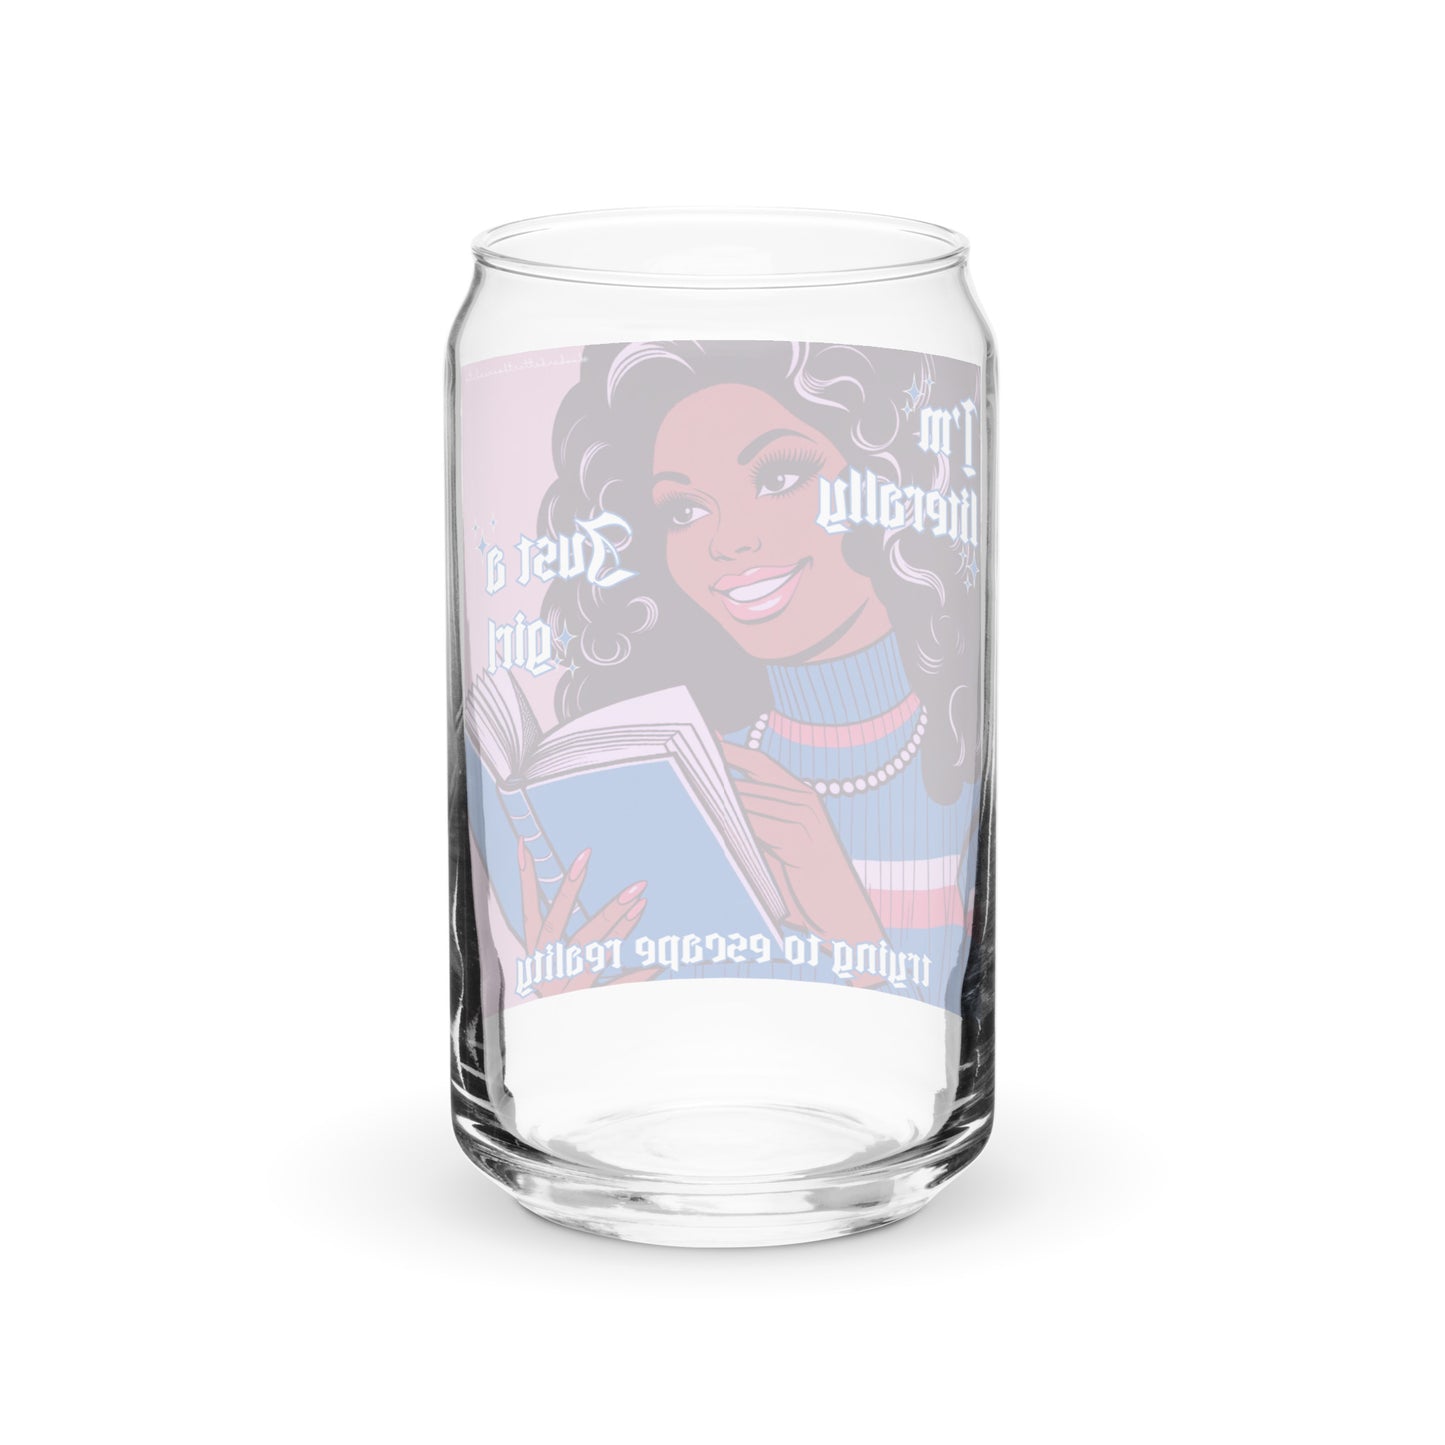 Just A Girl Glass Cup